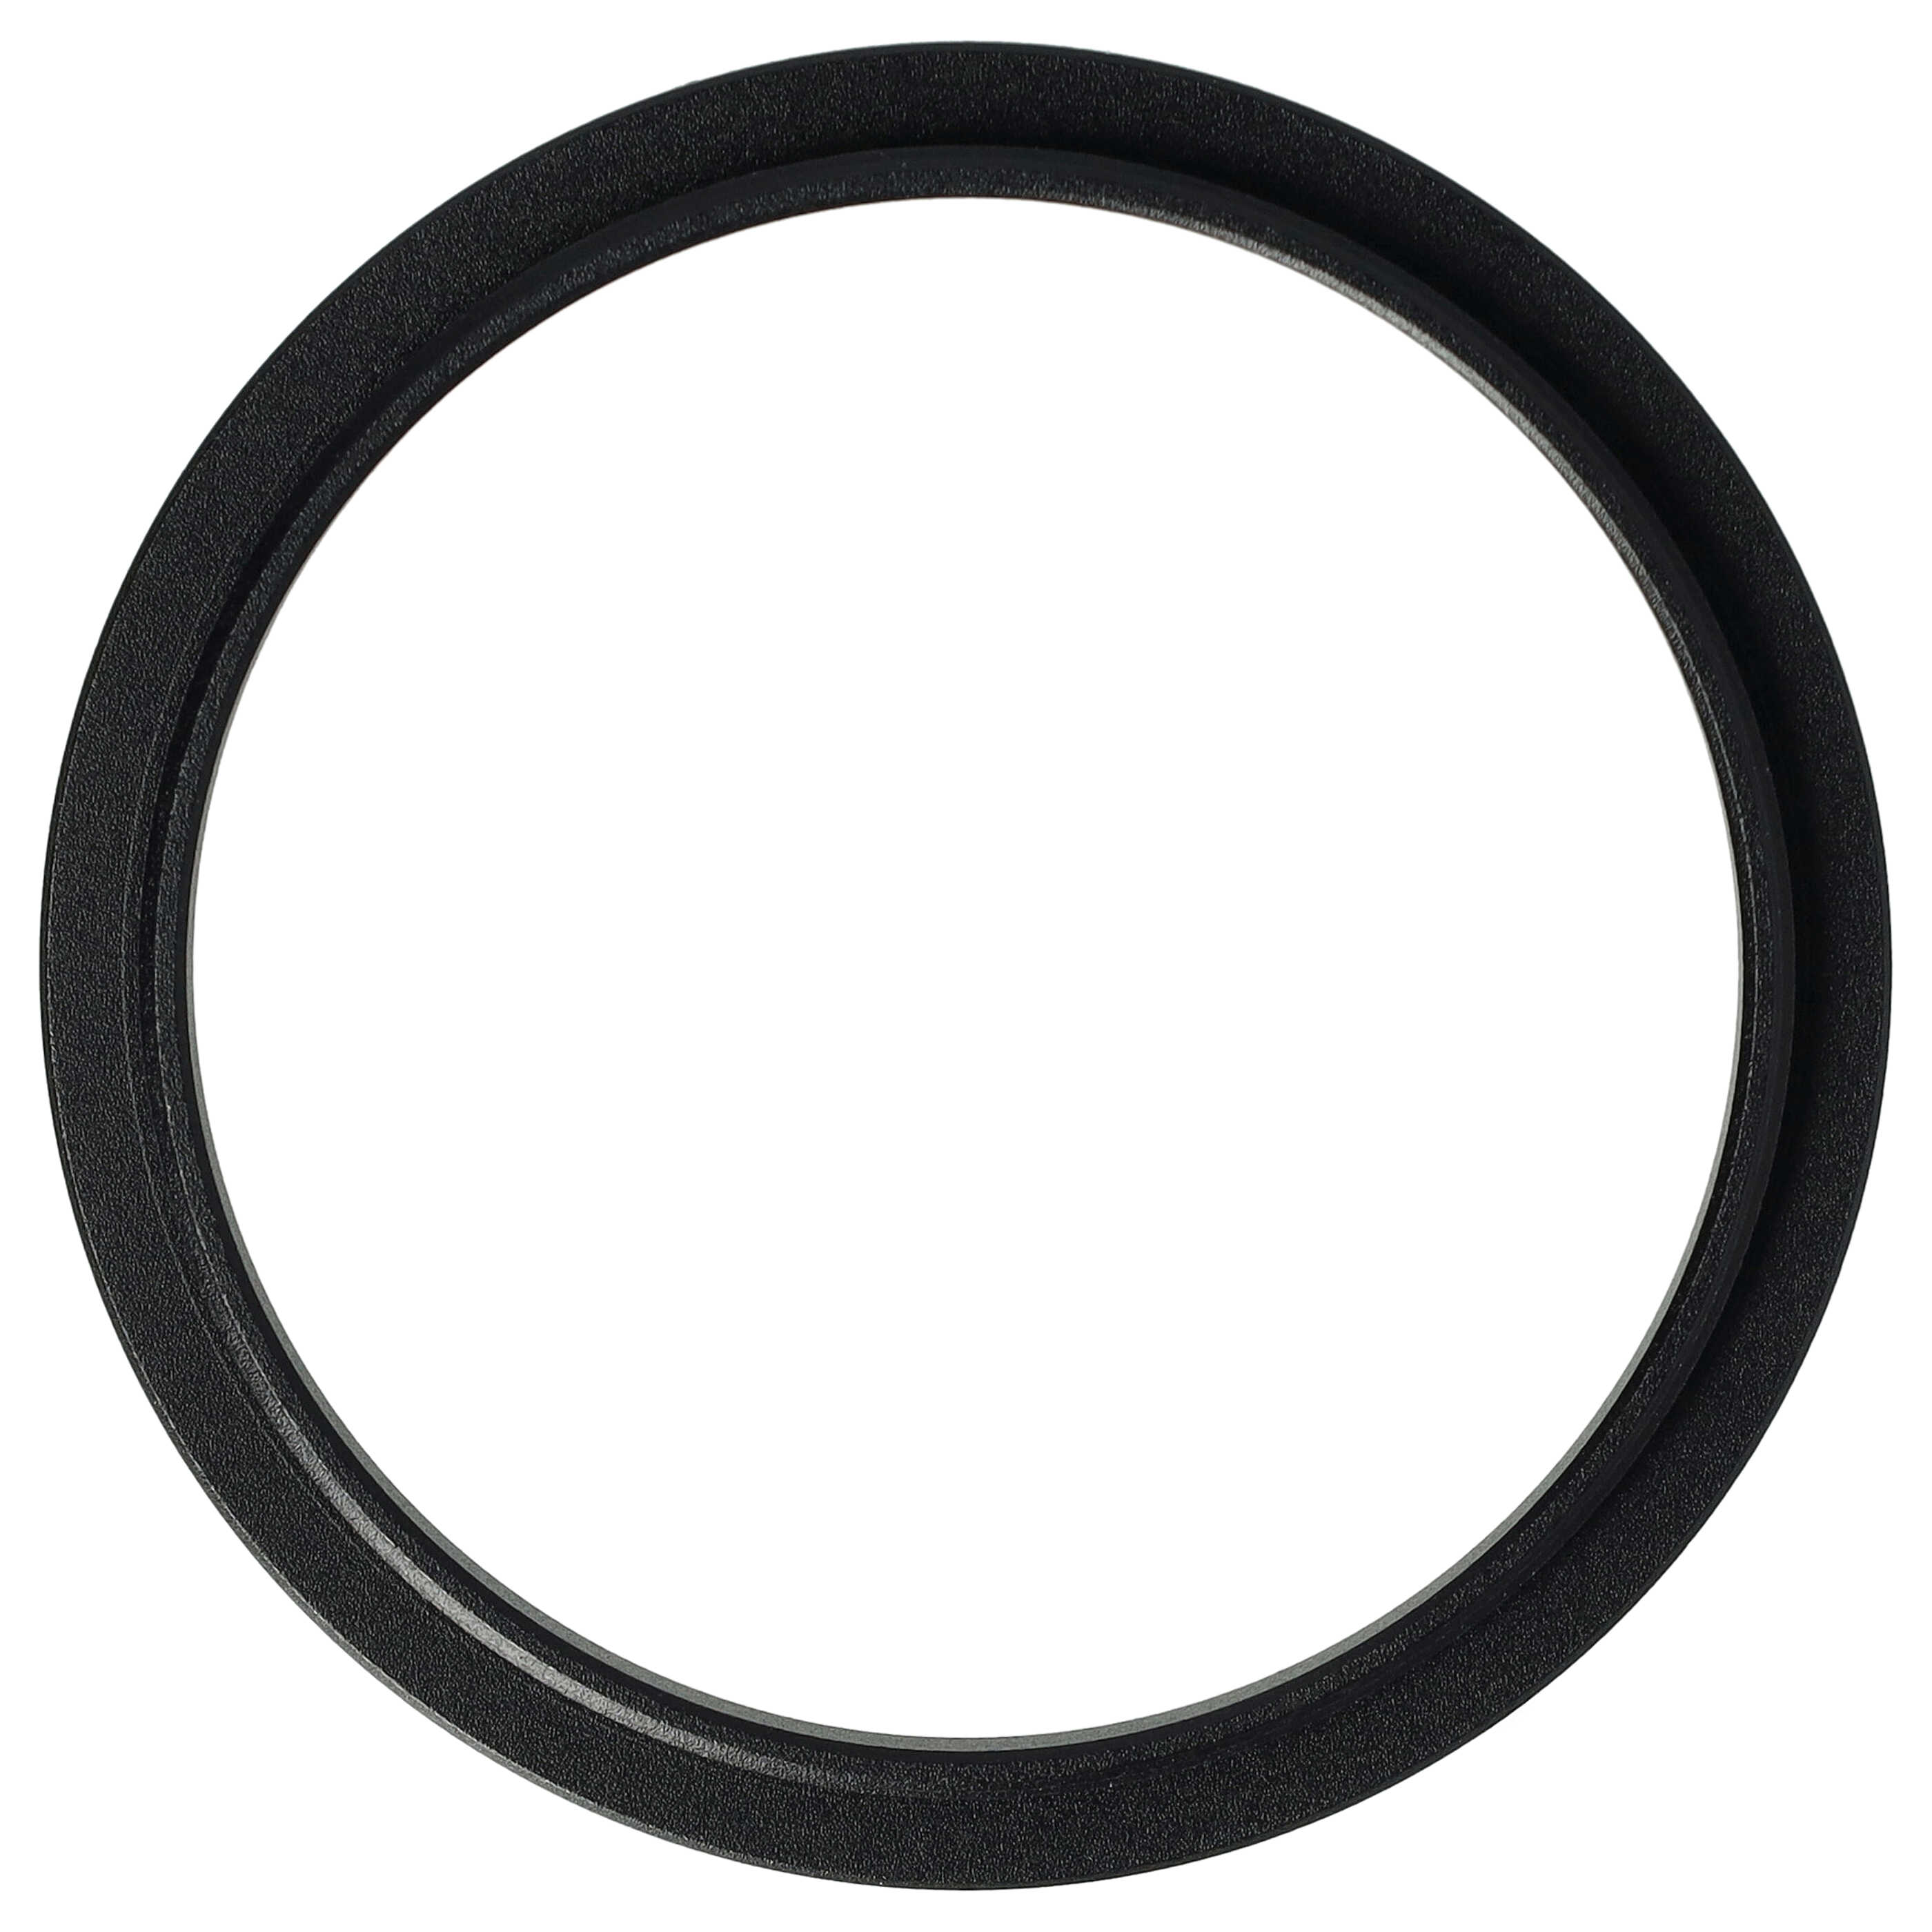 Step-Up Ring Adapter of 46 mm to 49 mmfor various Camera Lens - Filter Adapter